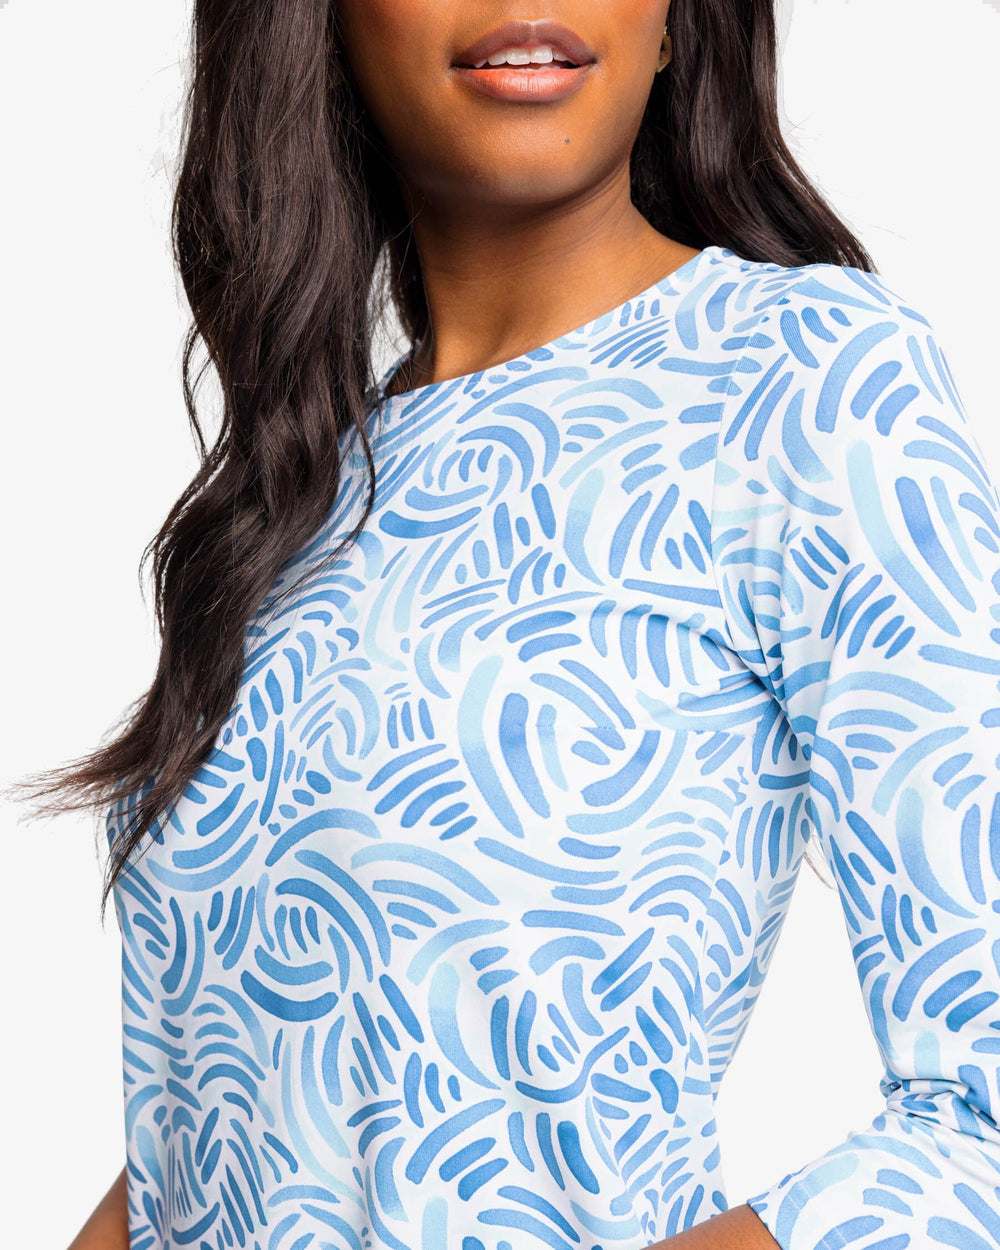 The detail view of the Southern Tide Leila Watercolor Whirl Printed Performance Dress by Southern Tide - Atlantic Blue